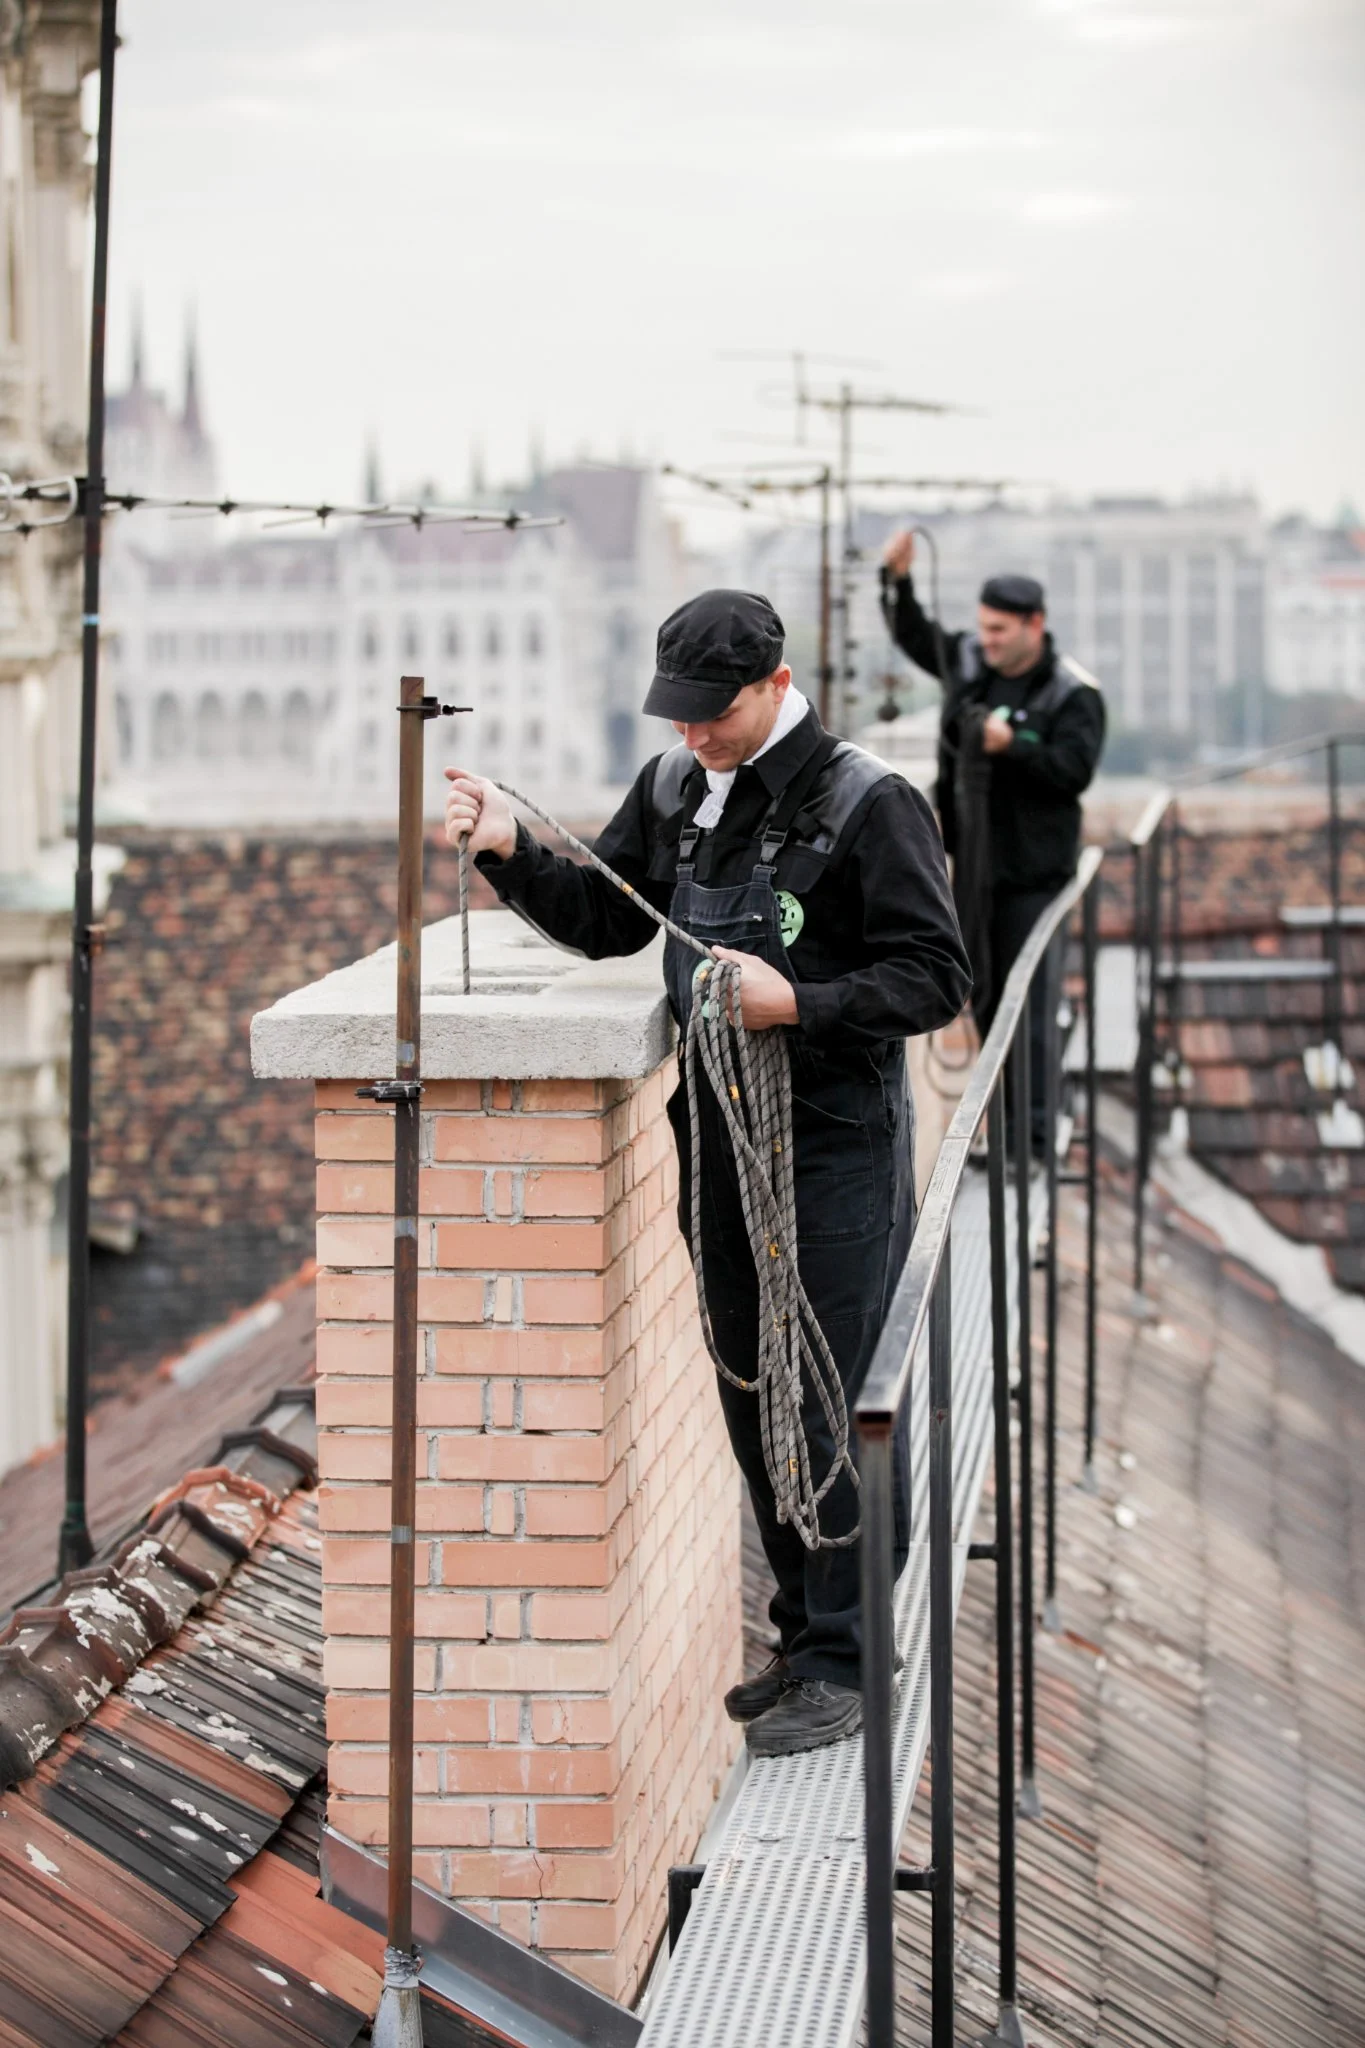 Chimney sweepers in Hungary